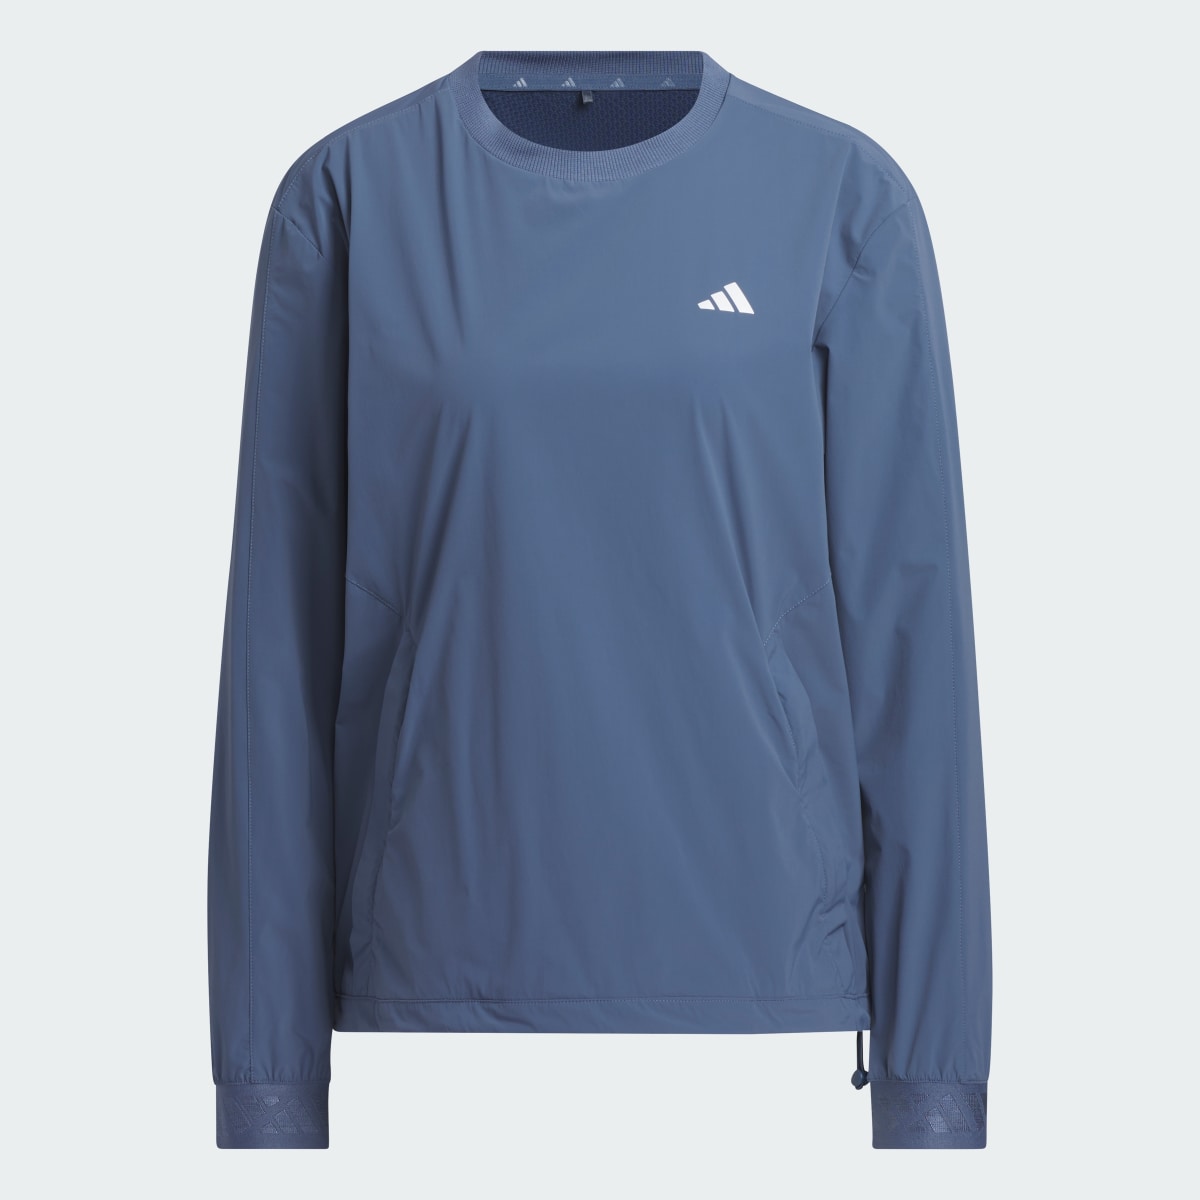 Adidas Ultimate365 Tour WIND.RDY Pullover Sweatshirt. 5